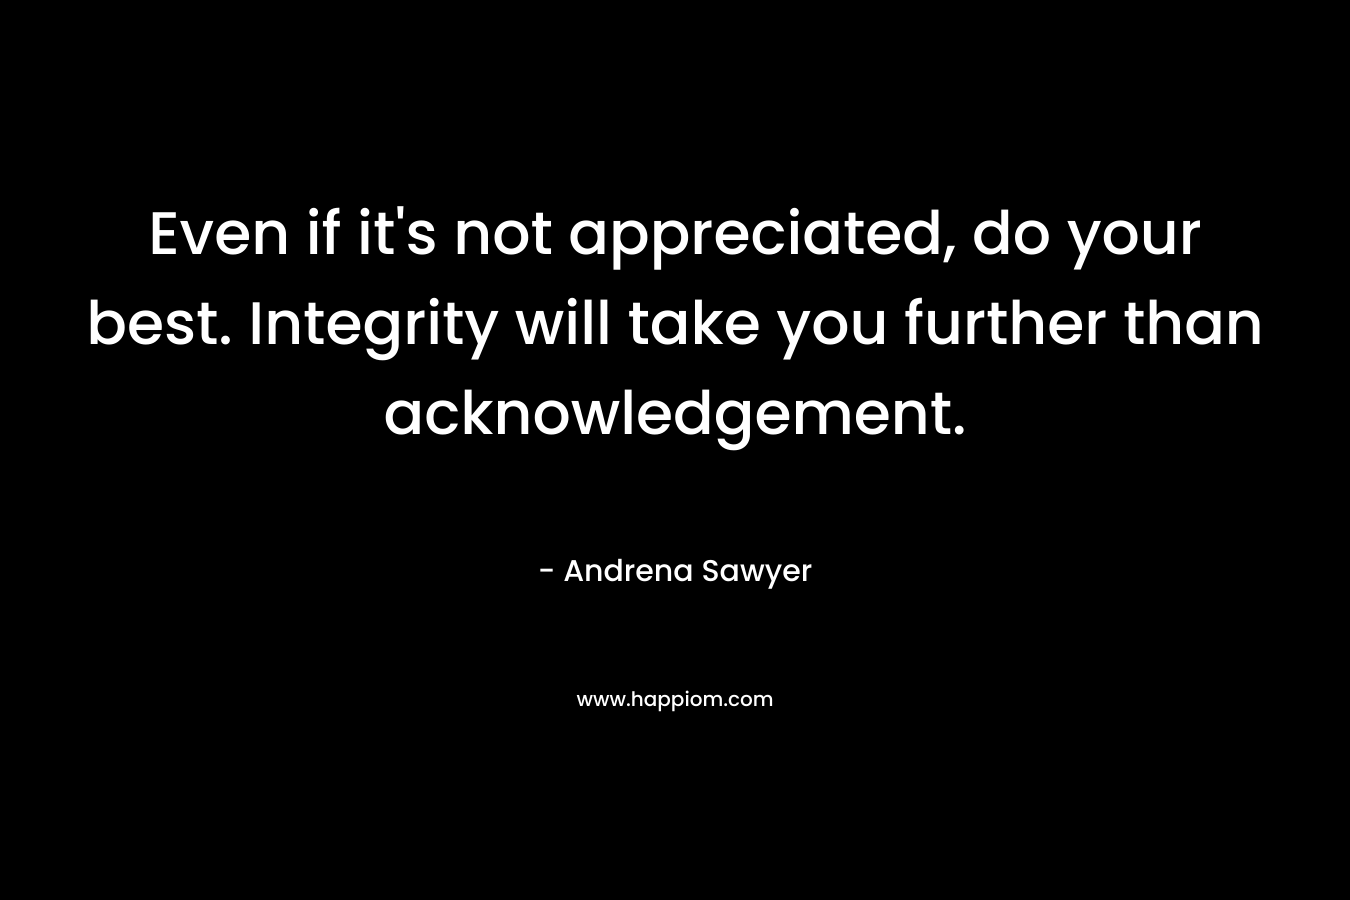 Even if it's not appreciated, do your best. Integrity will take you further than acknowledgement.